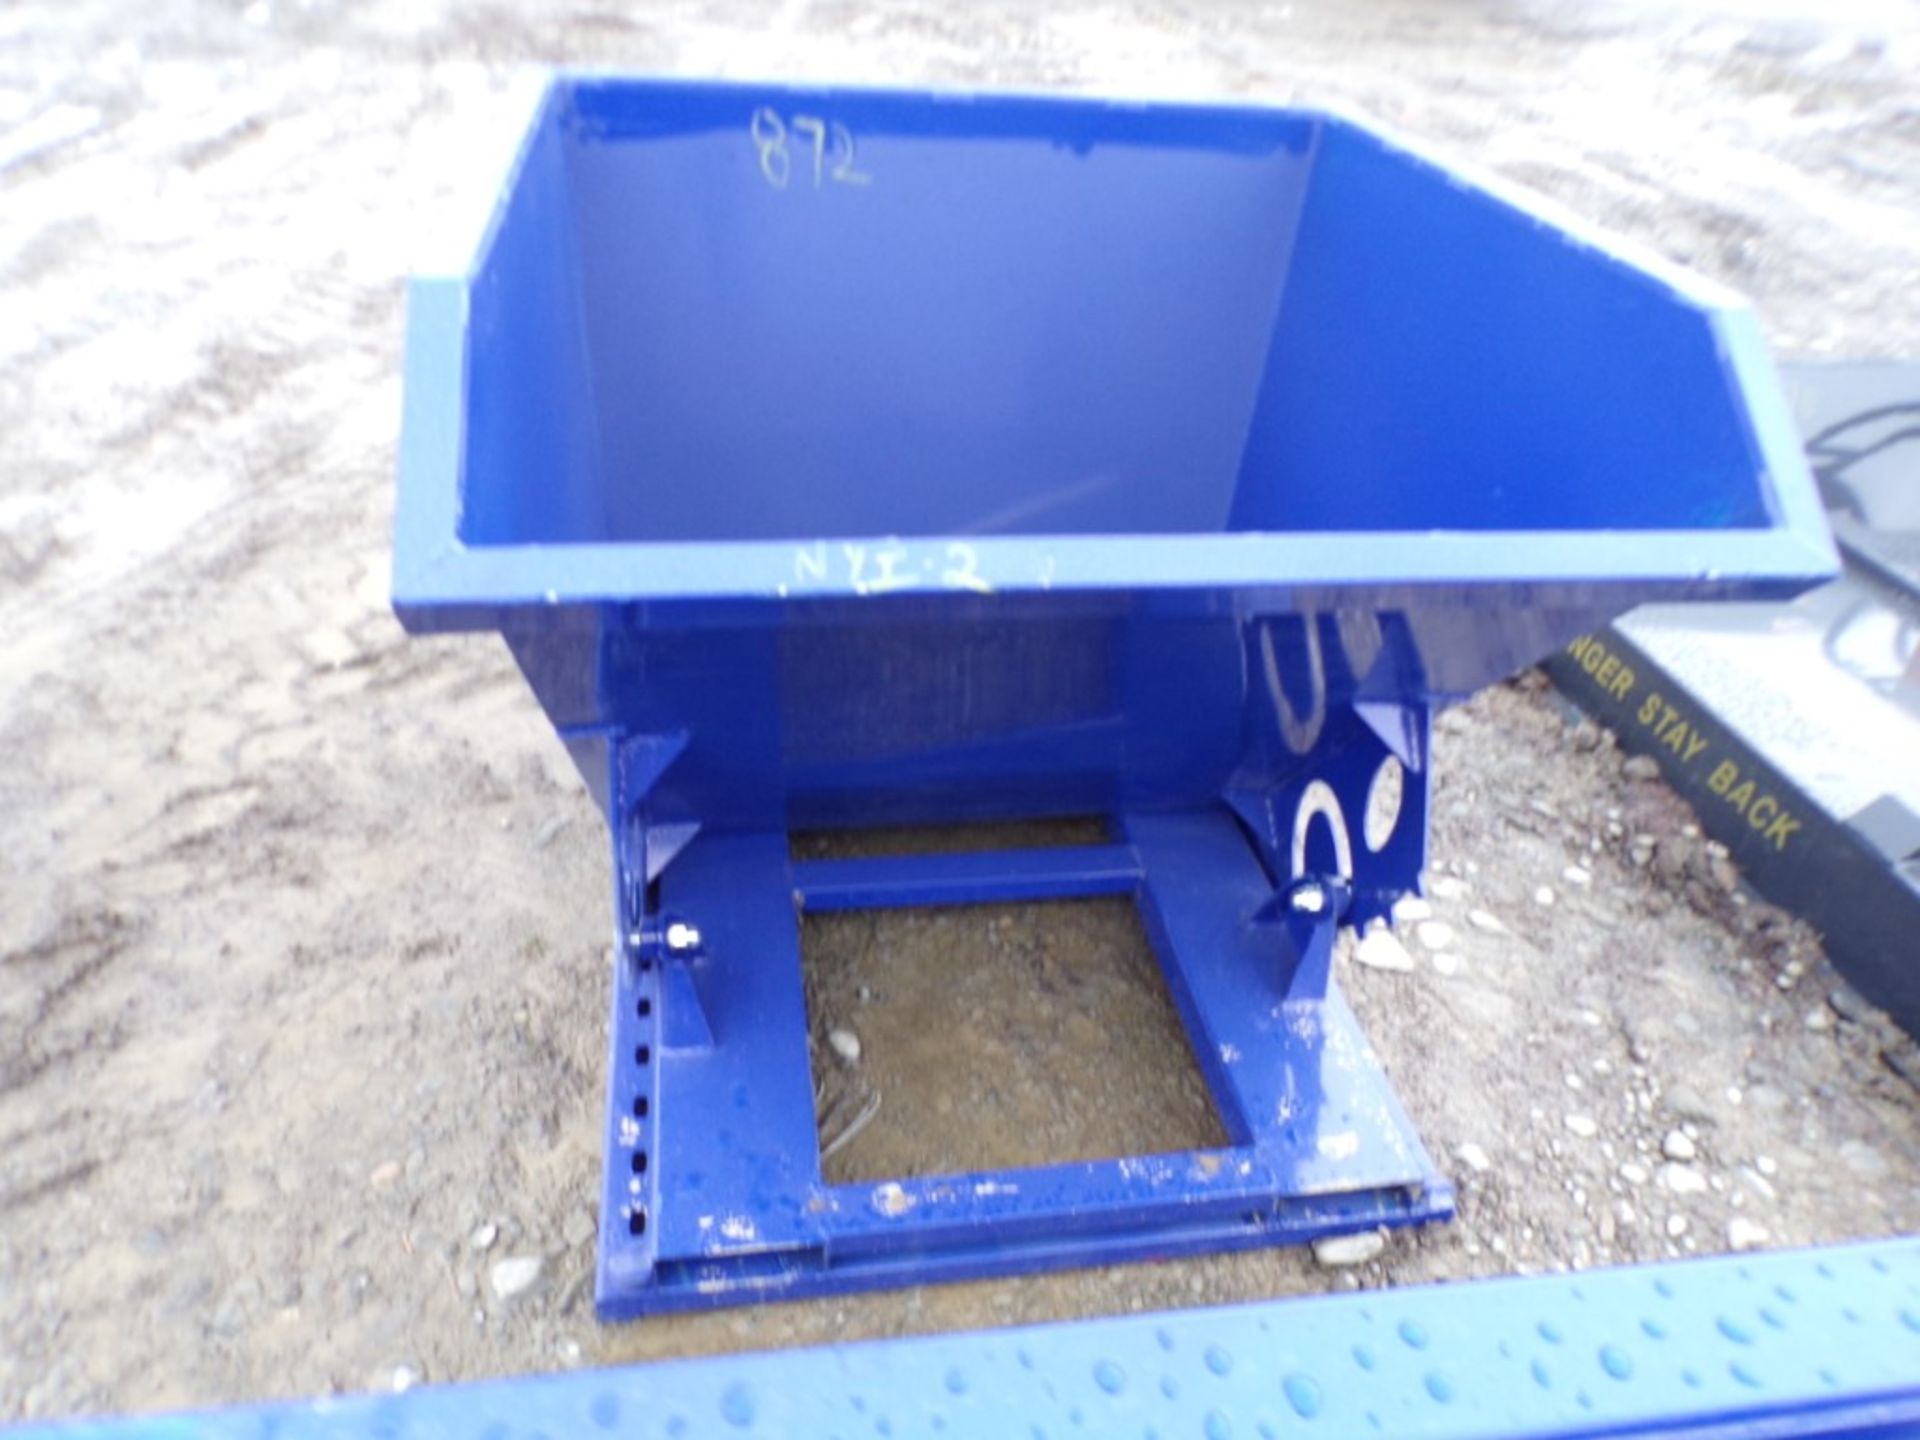 New Blue Garbage Tipper for Fork Lift